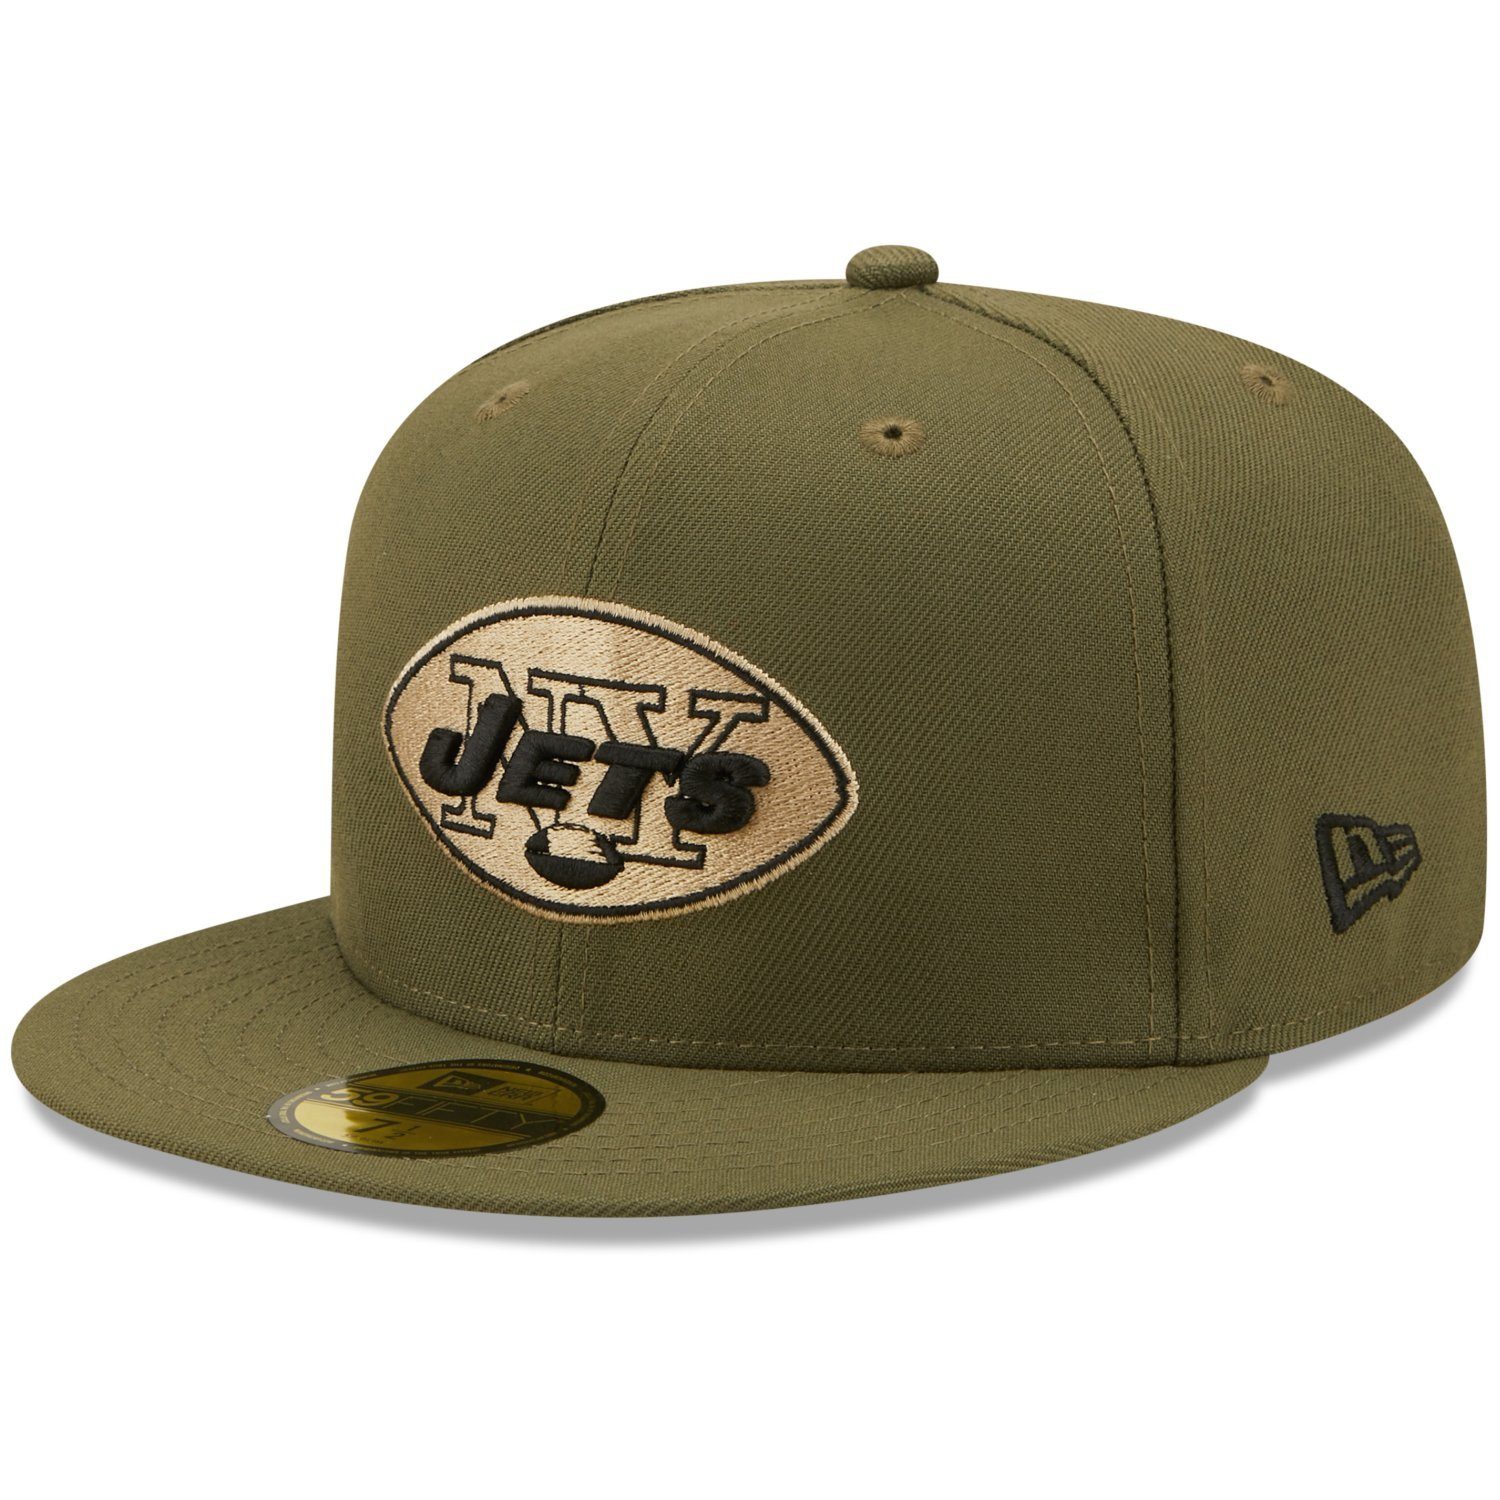 New Era Fitted York Throwback Cap Jets ProBowl NFL New 59Fifty Superbowl